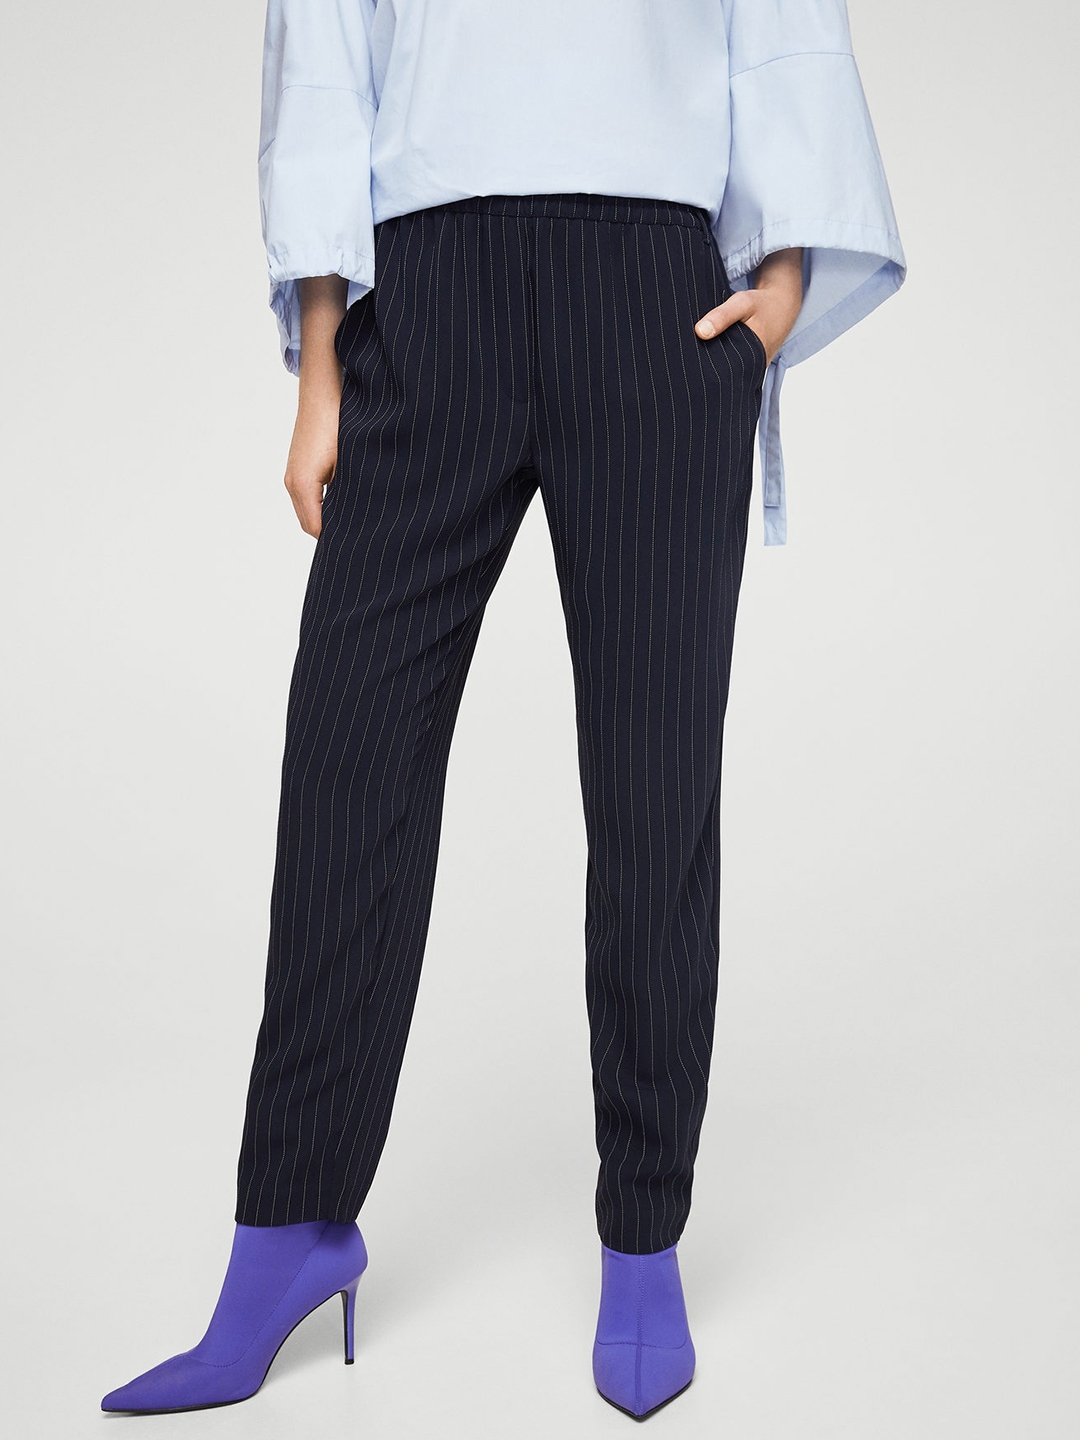 Buy MANGO Women Black  Off White Regular Fit Checked Trousers  Trousers  for Women 7158155  Myntra